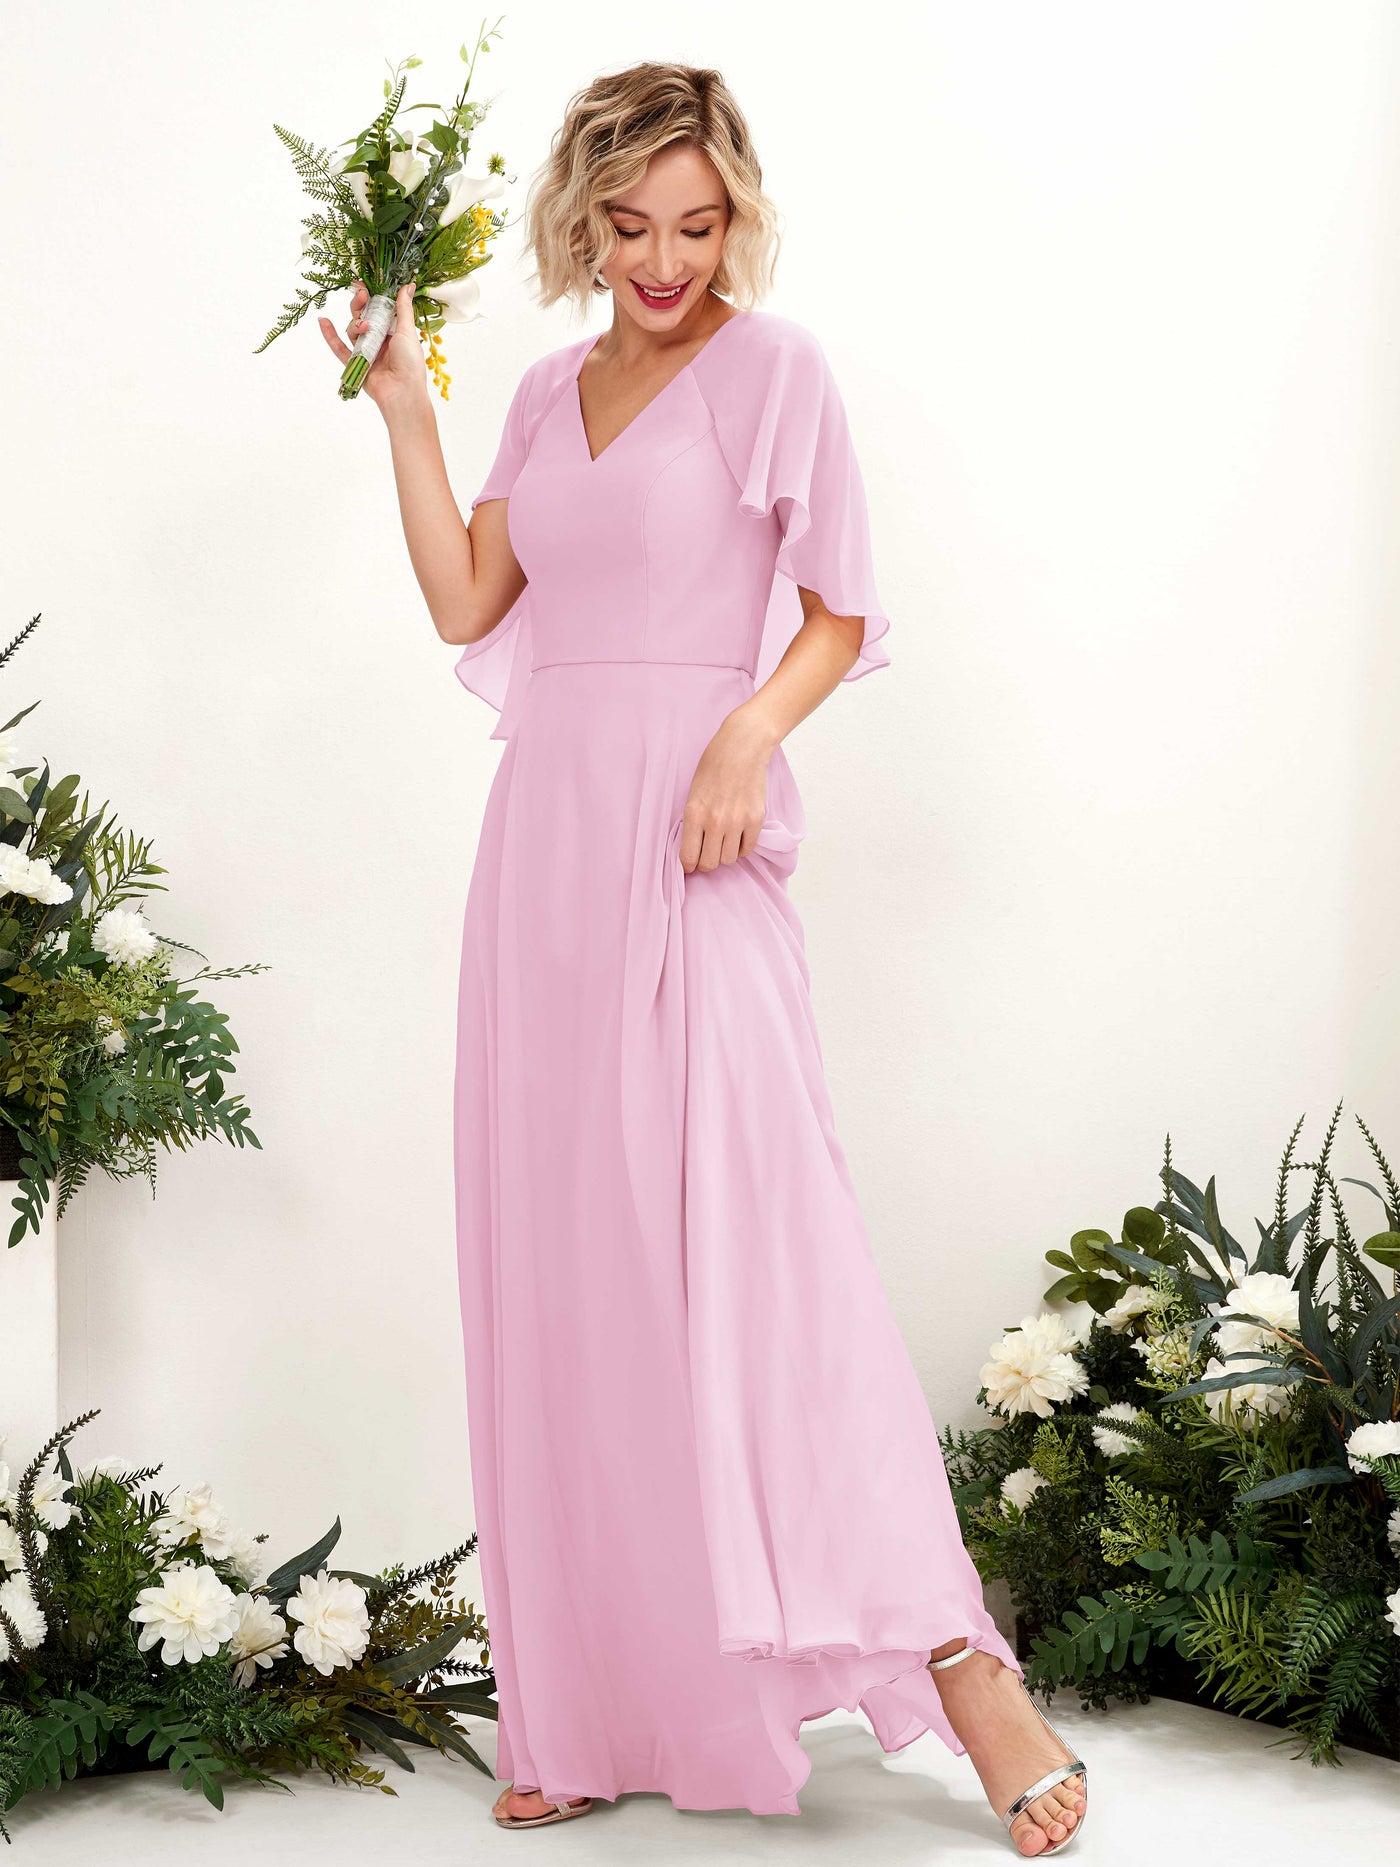 Candy Pink Bridesmaid Dresses Bridesmaid Dress A-line Chiffon V-neck Full Length Short Sleeves Wedding Party Dress (81224439)#color_candy-pink